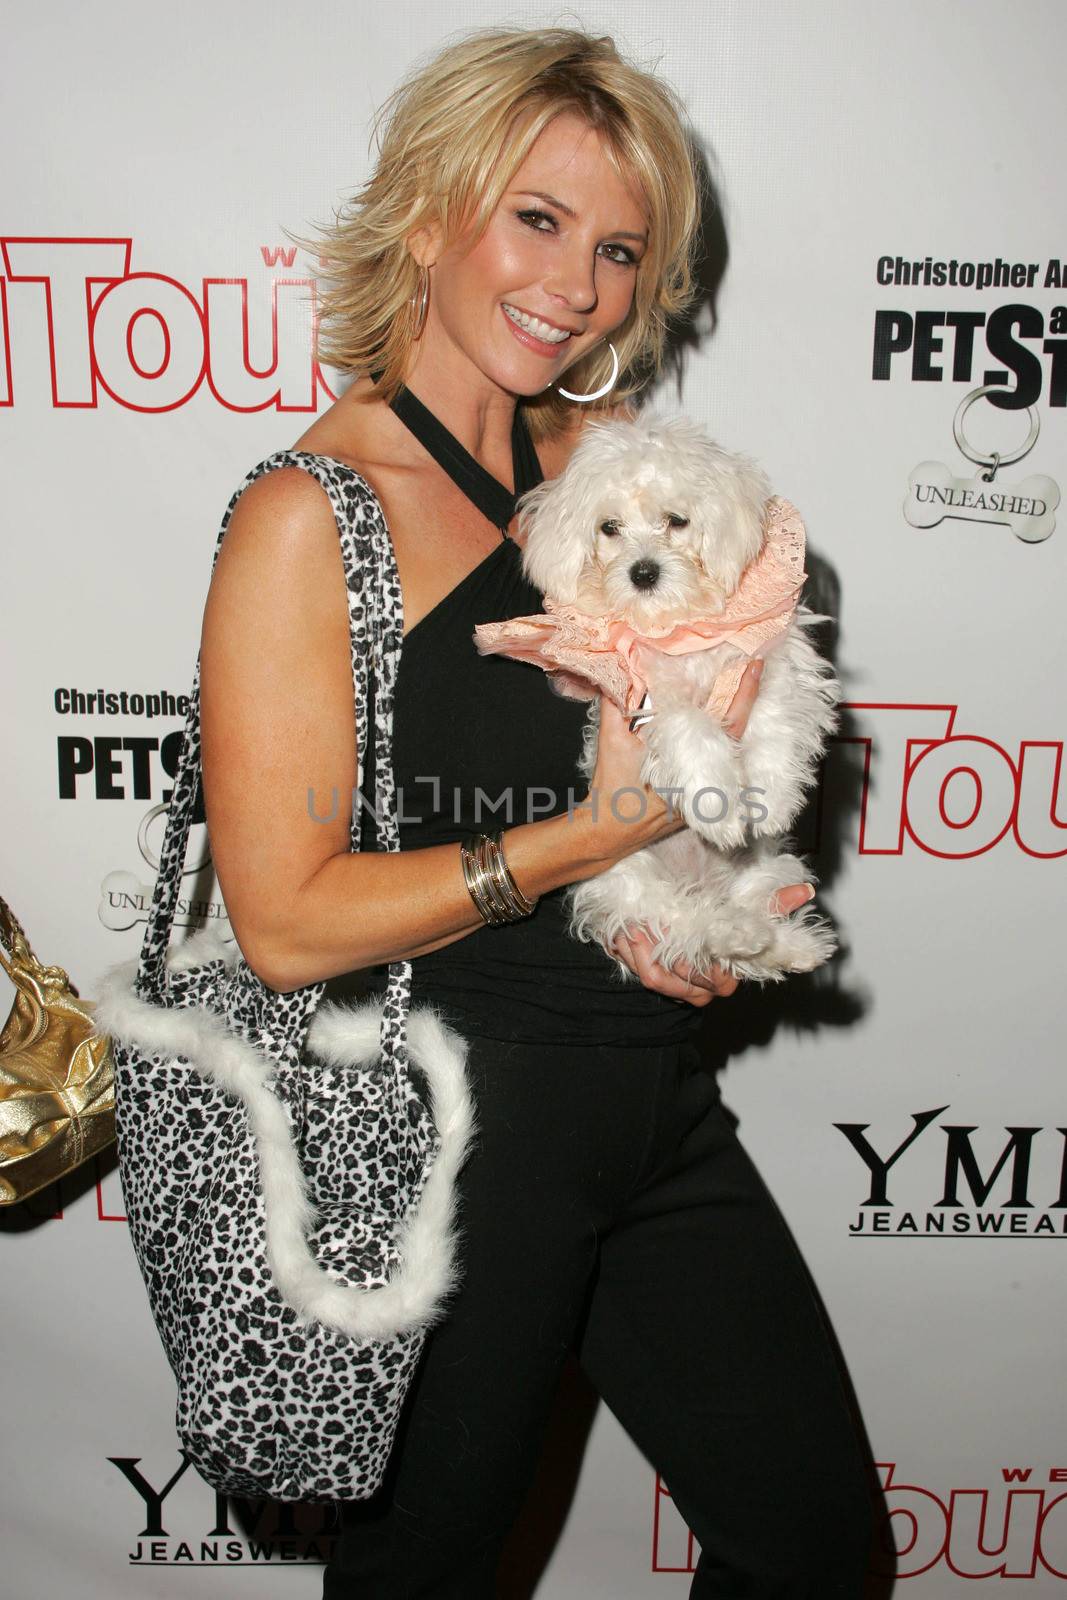 Tamie Sheffield at the In Touch Presents Pets And Their Stars Party, Cabana Club, Hollywood, CA 09-21-05